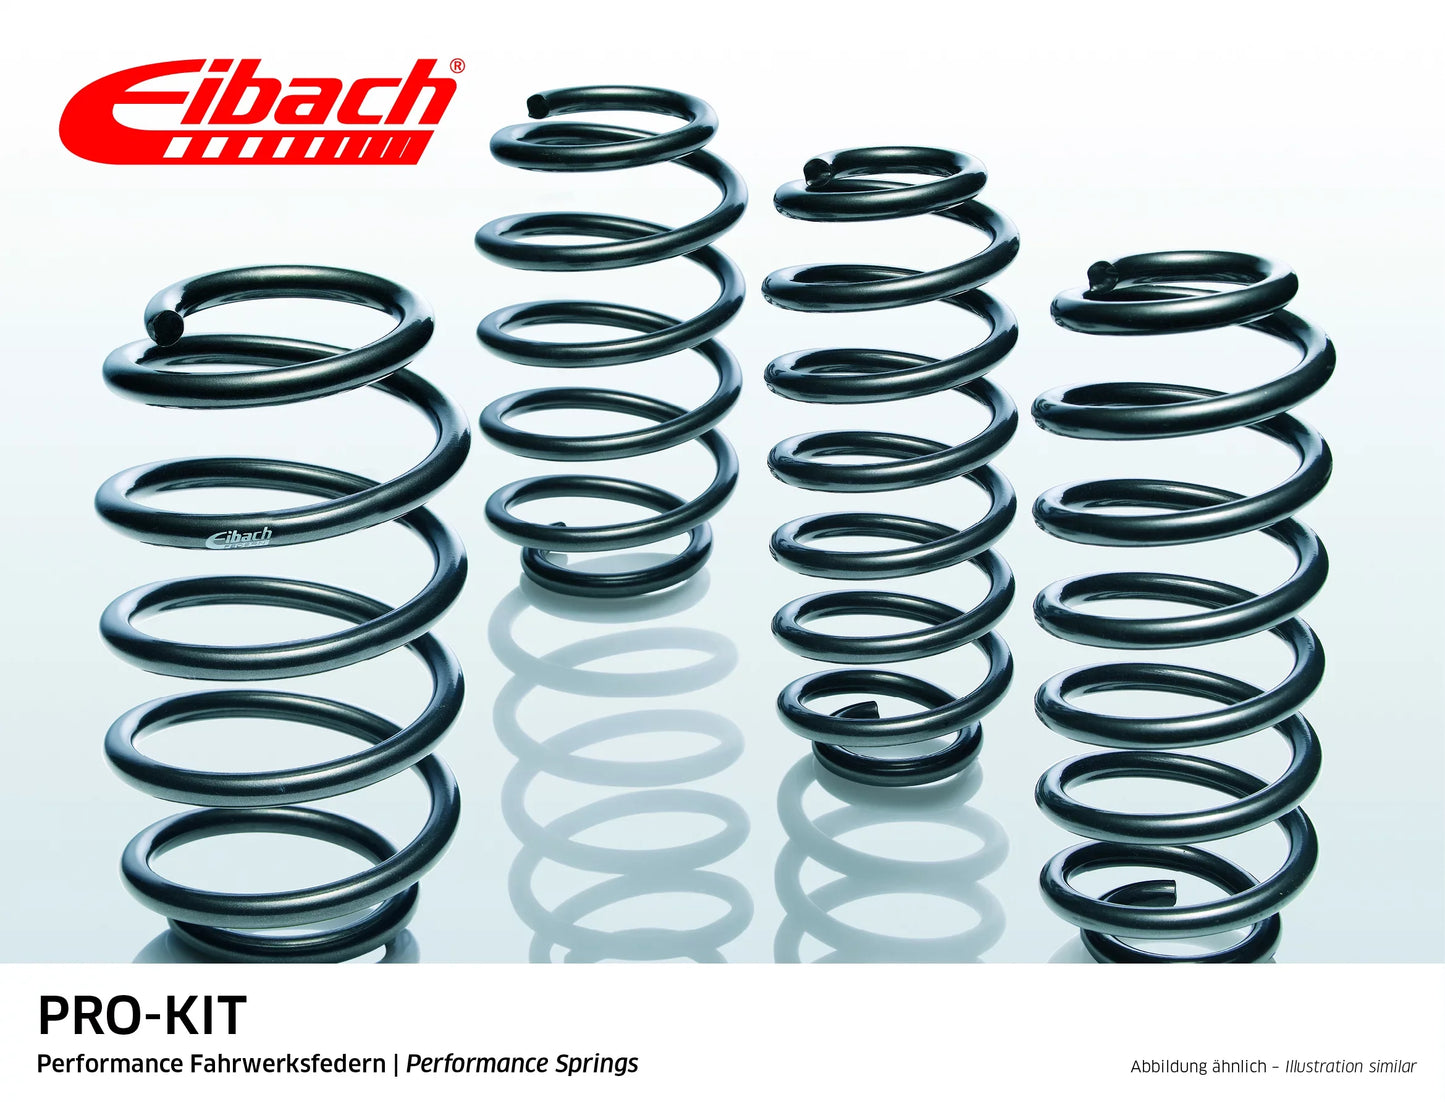 Eibach Pro-Kit Lowering Springs (E10-47-006-02-22) at £270.84